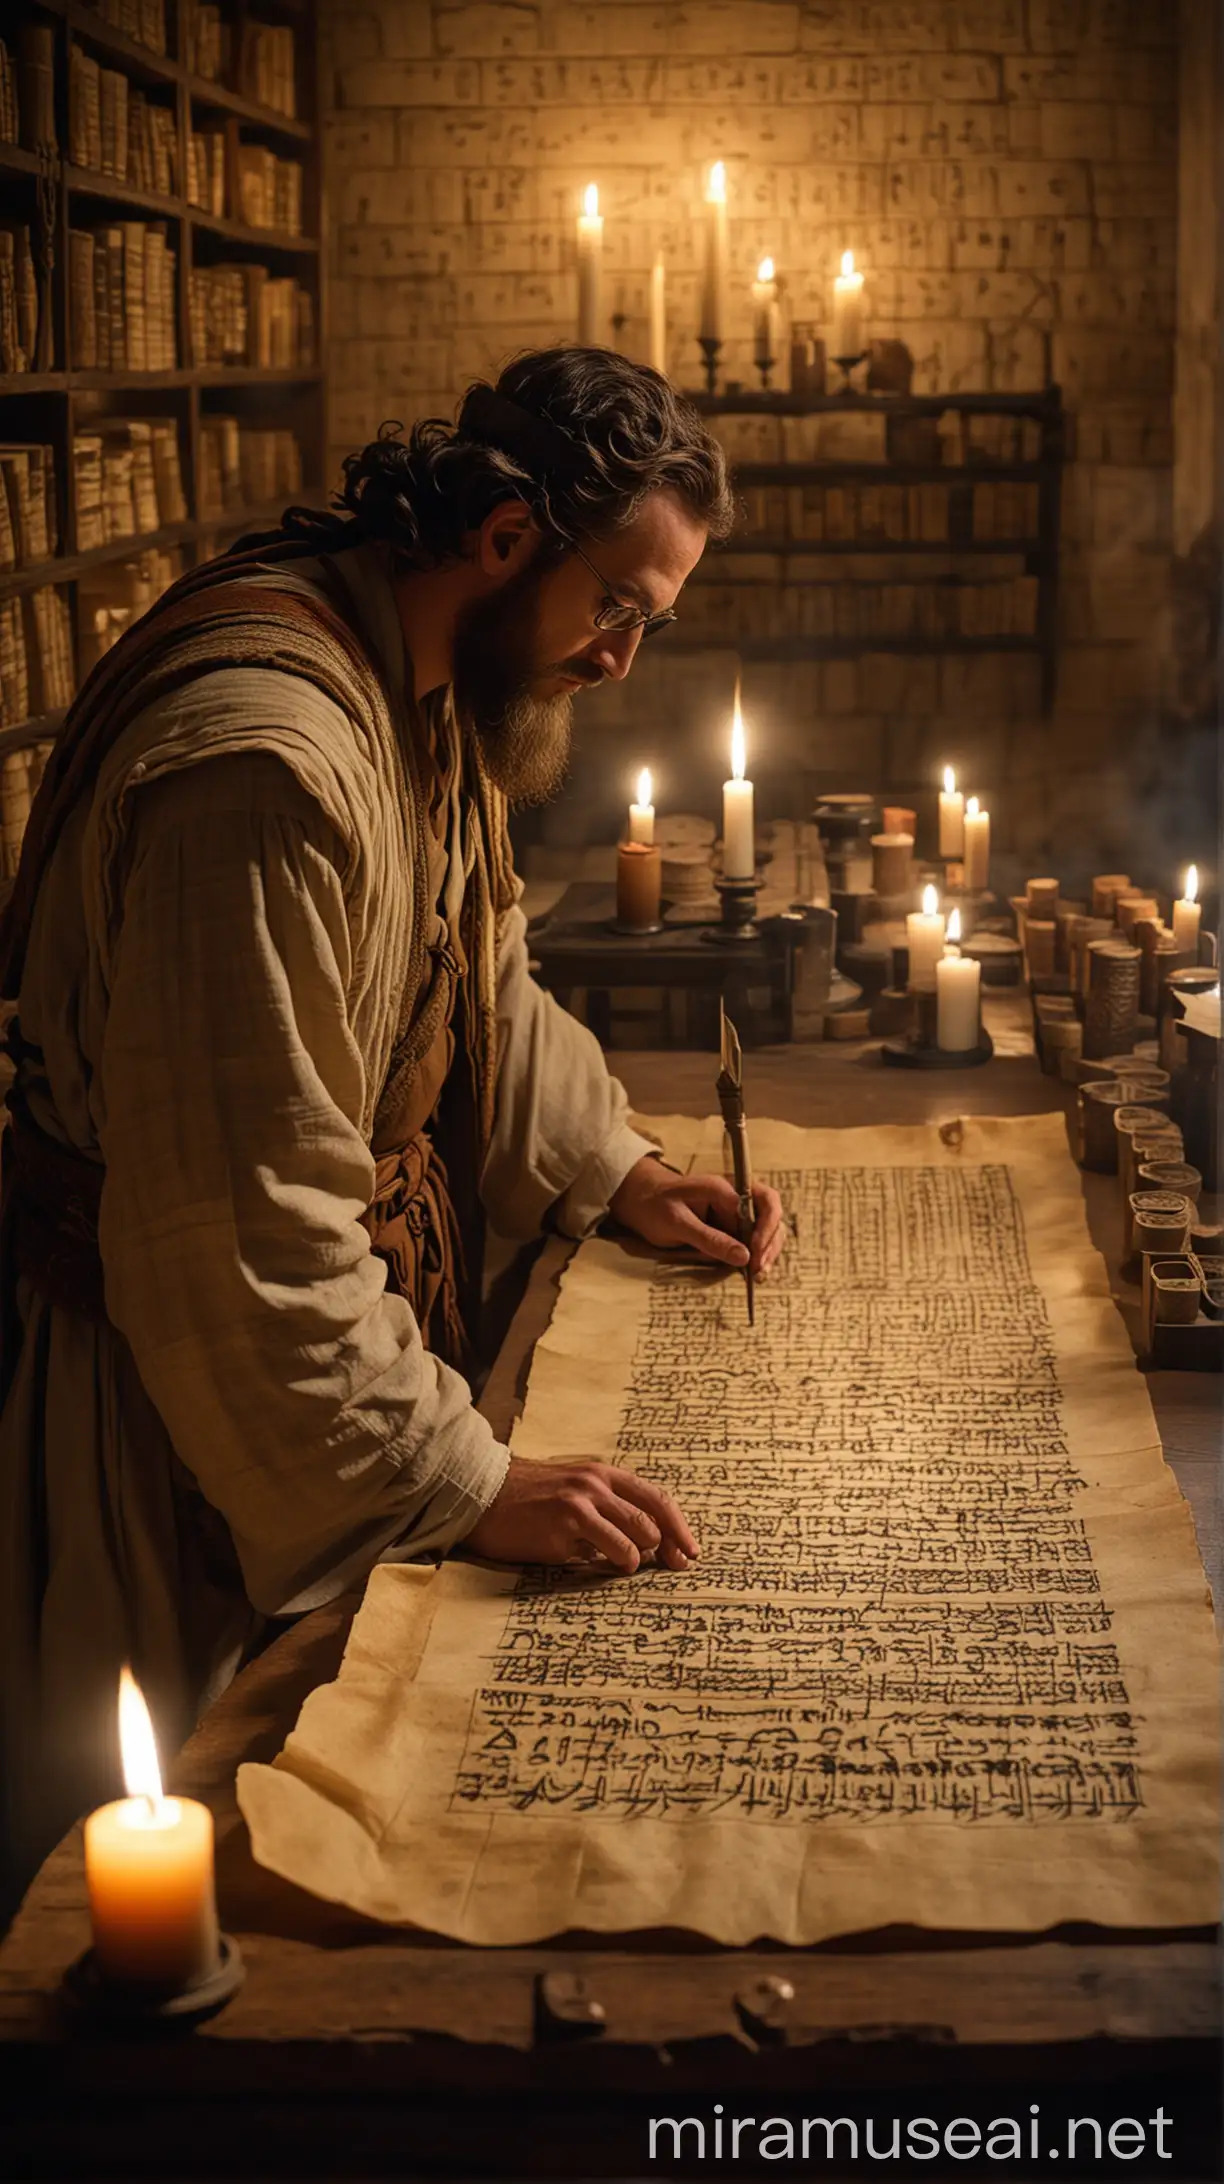 A historian in ancient attire, carefully examining a parchment scroll with ancient Hebrew writing, dating back to the 17th century BC. The scene is illuminated by a flickering candle in a dimly lit room, with shelves of ancient texts in the background."In ancient world 